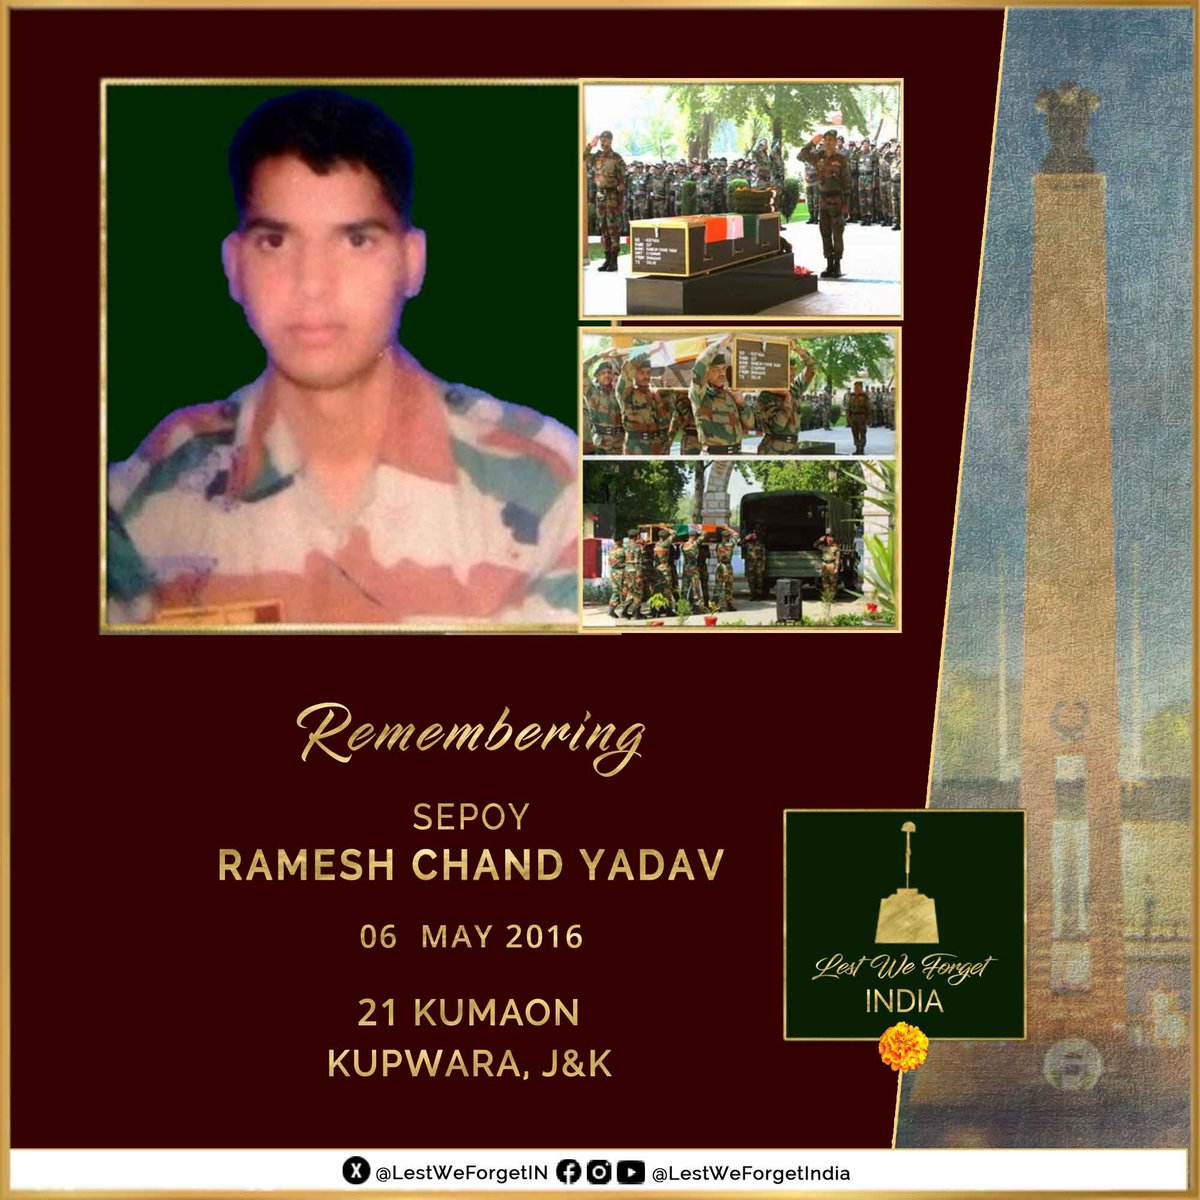 Do you remember Sepoy Ramesh Chand Yadav? #LestWeForgetIndia🇮🇳 The gallant #IndianBrave of 21 KUMAON, laid down his life fighting terrorists while foiling an infiltration bid at Kupwara, J&K #OnThisDay 06 May in 2016 Remember the service & supreme sacrifice of our unknown and…